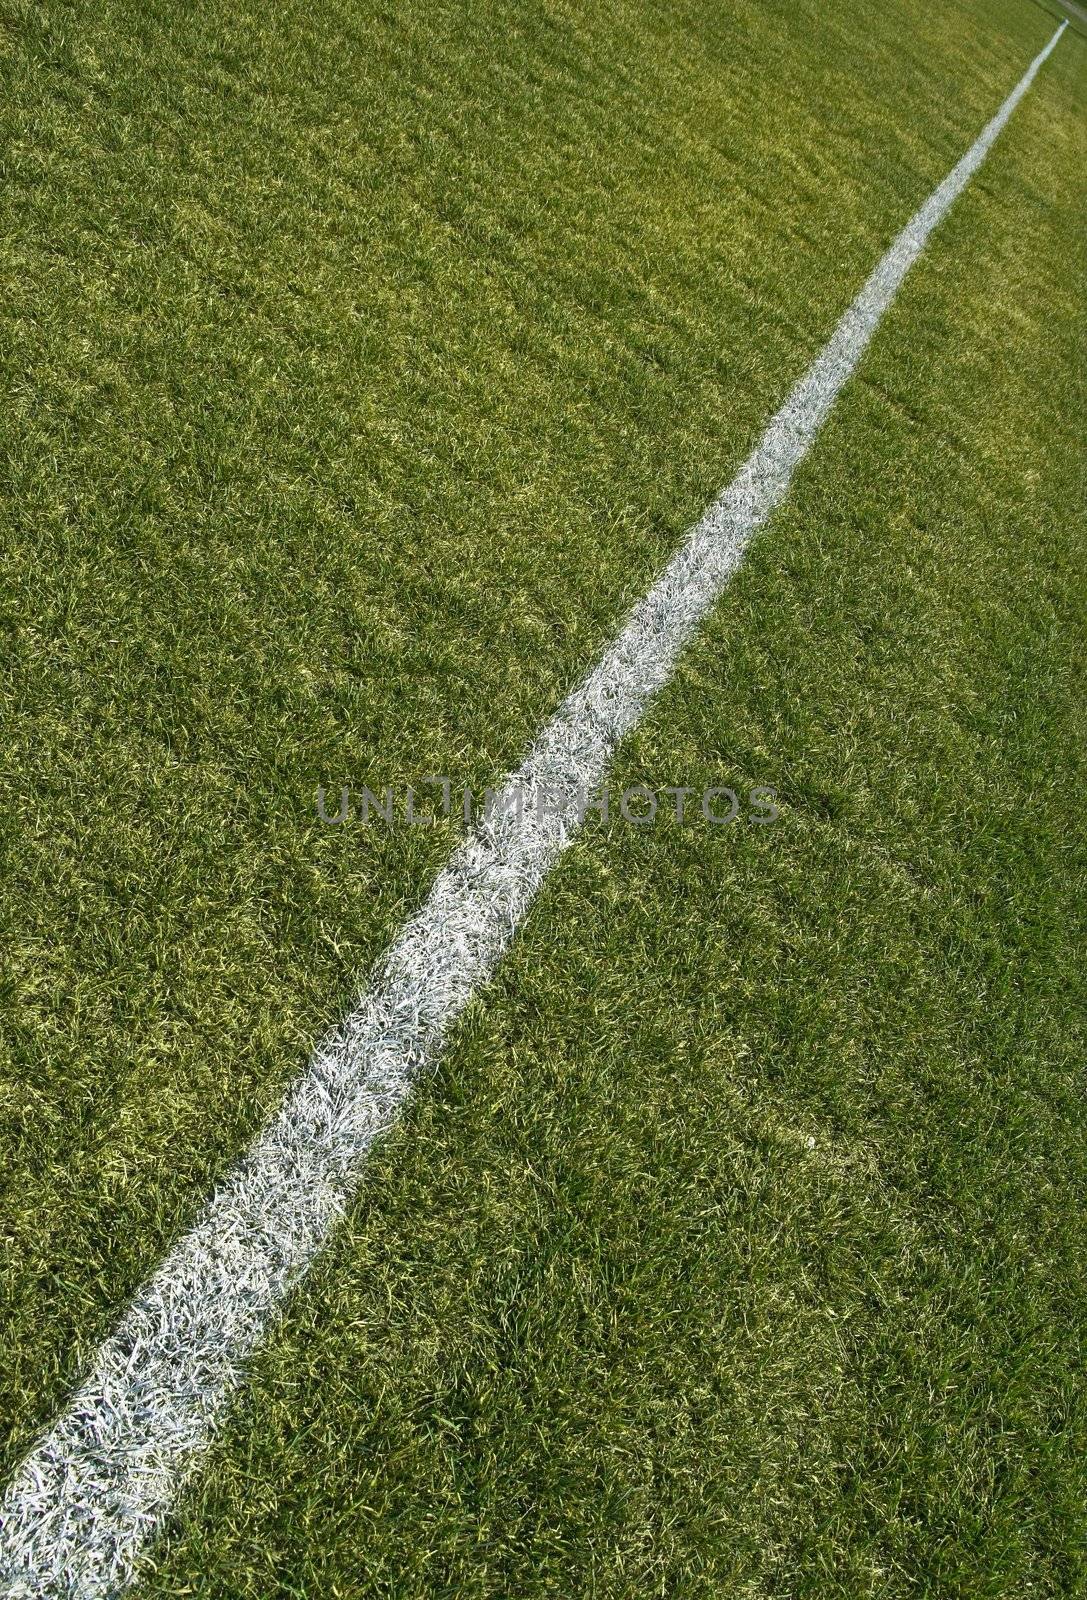 Boundary line of a soccer/football playing field.